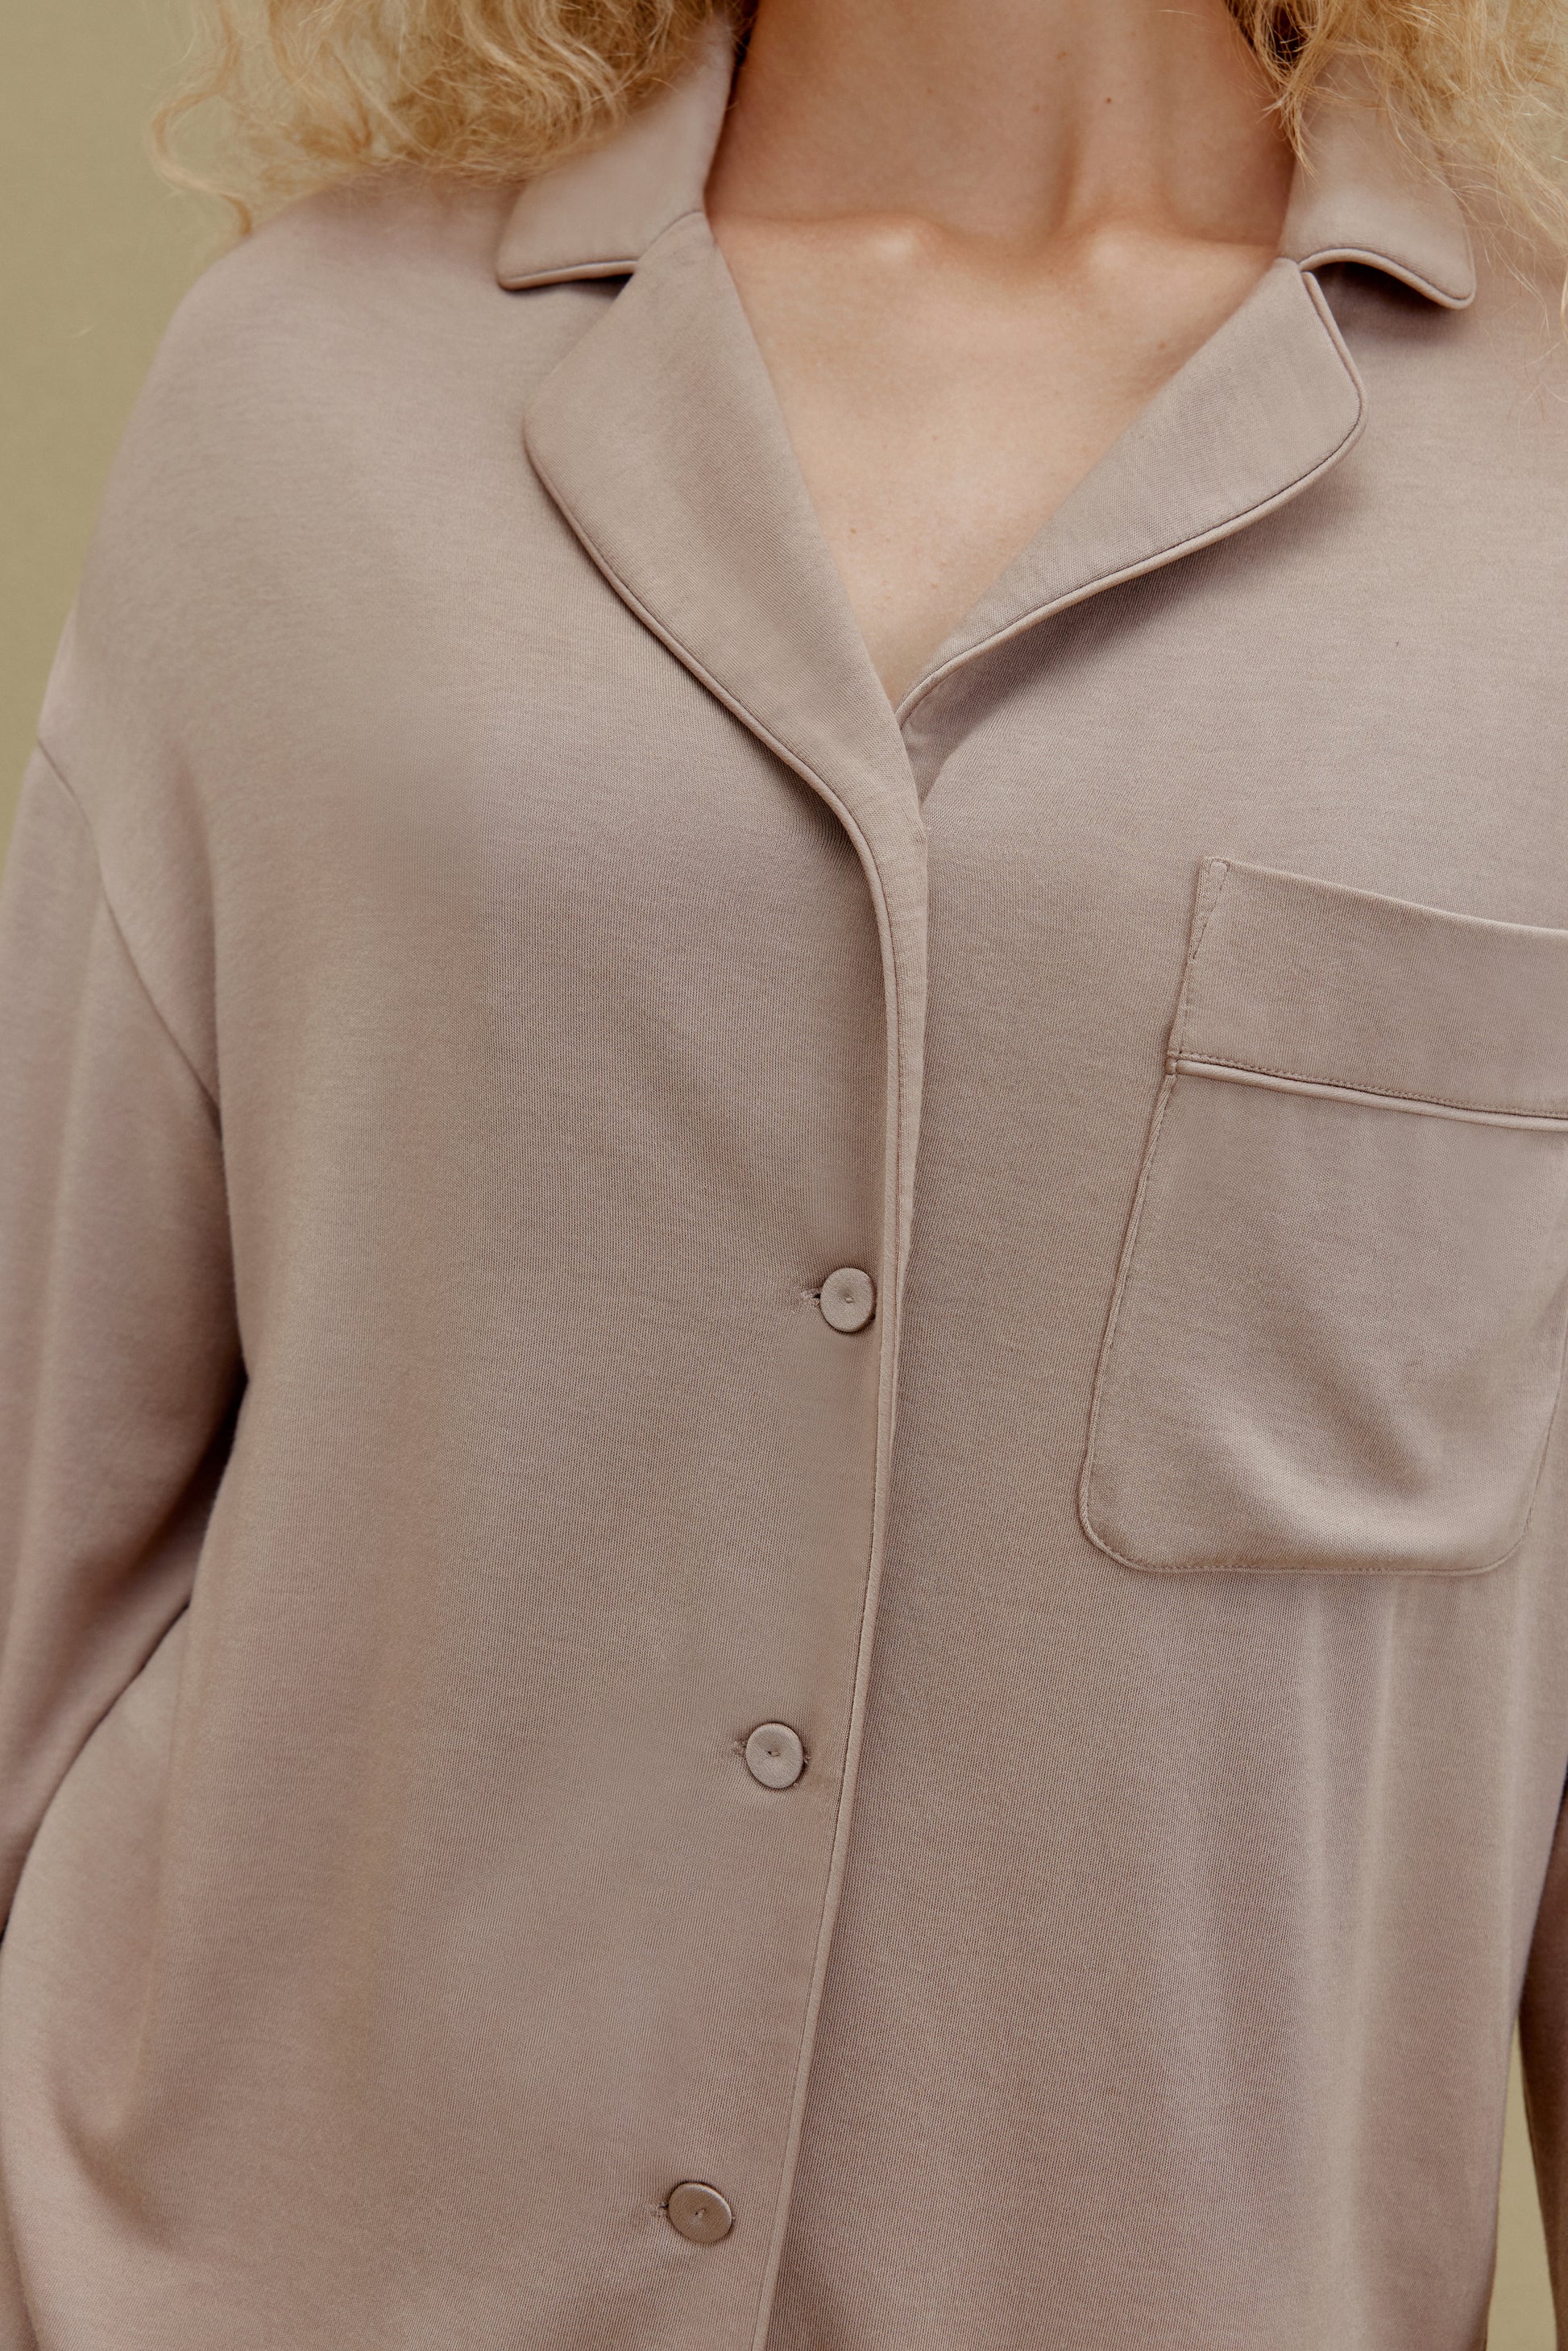 Close up front view of woman wearing tan button up pajama shirt with pocket